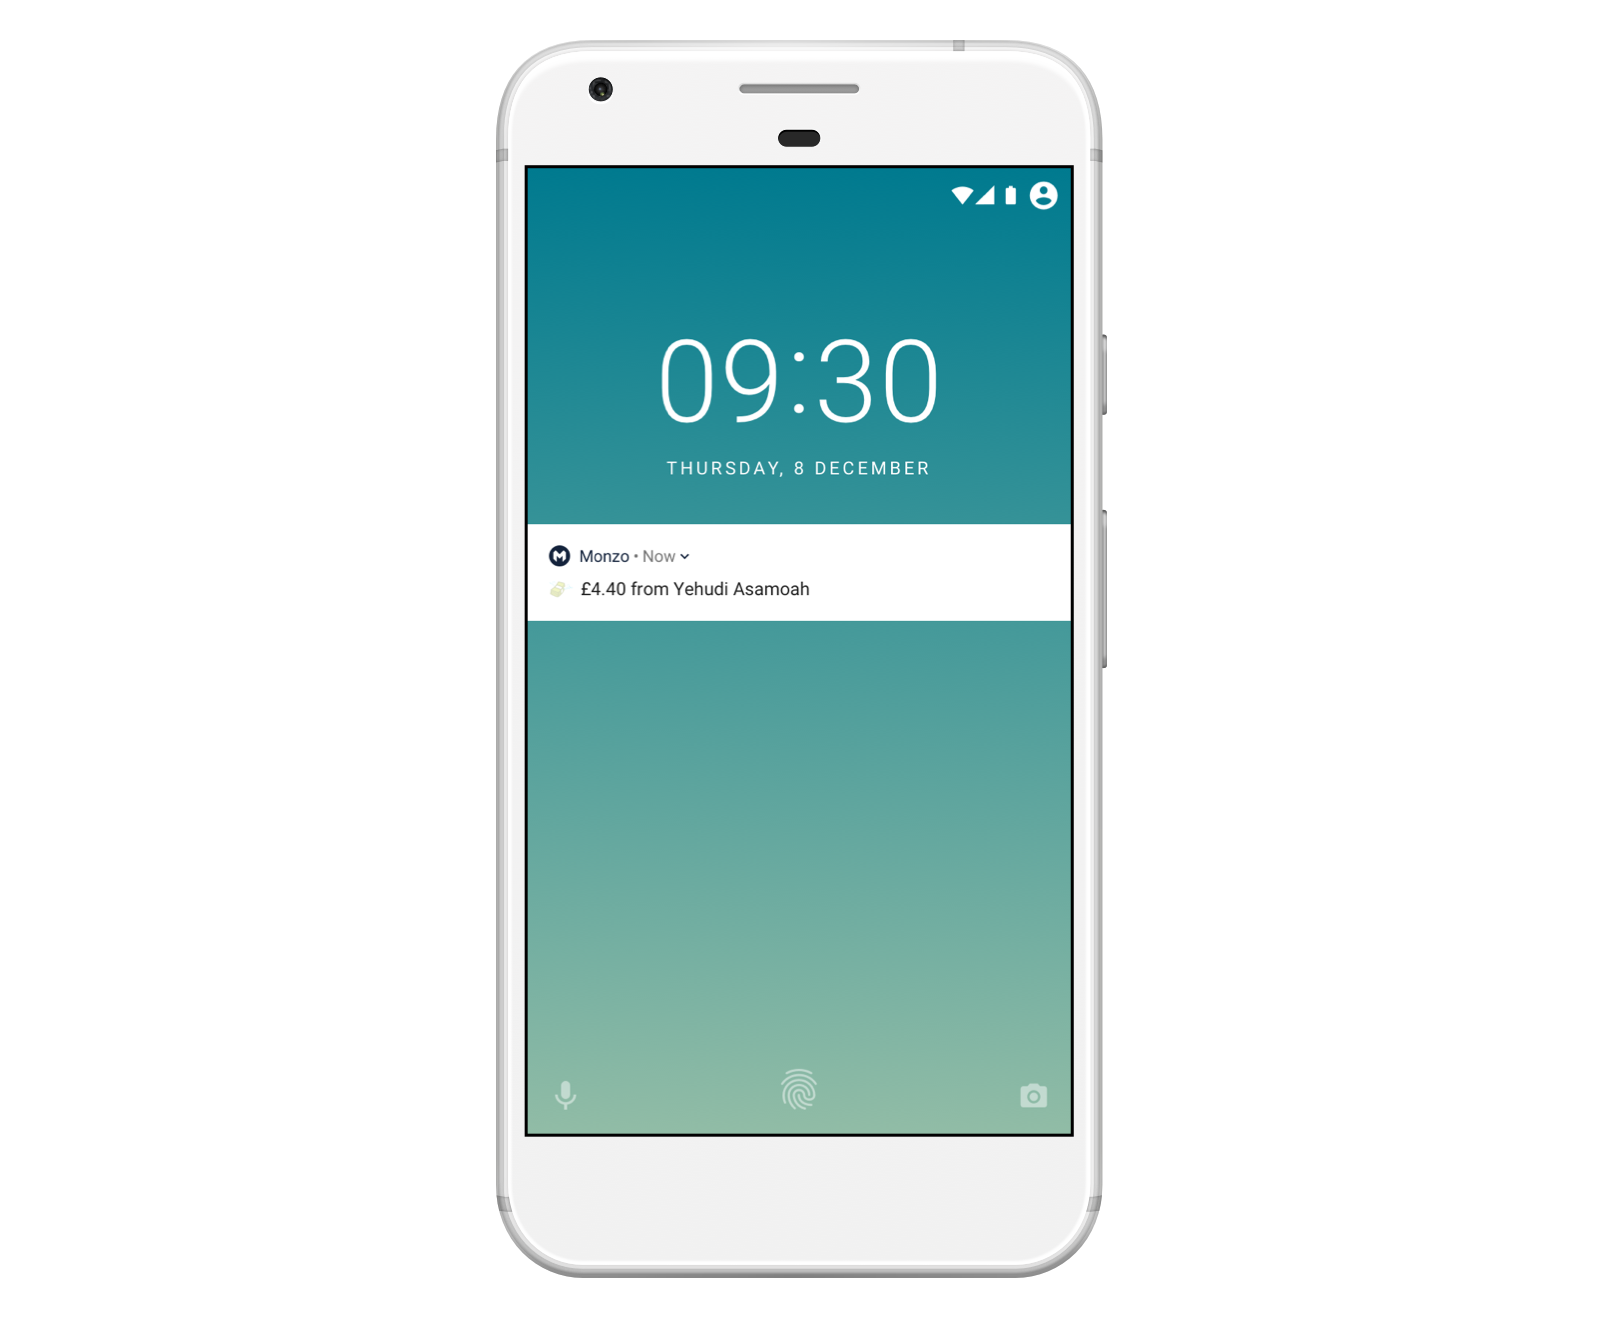 Image of a smartphone showing an instant notification from the Monzo app